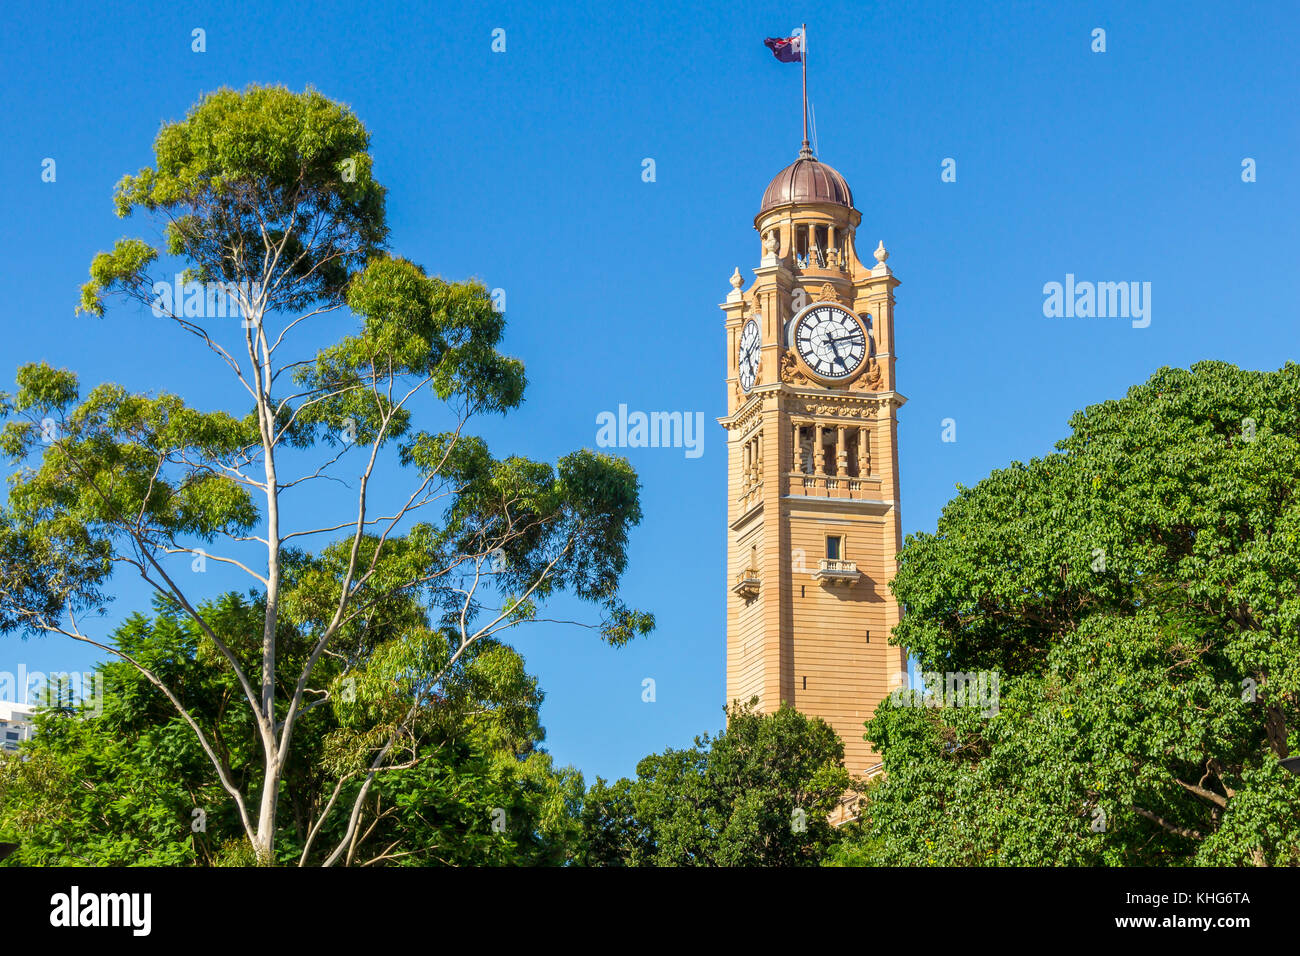 Clock Tower of the Central Station | Sydney | Australia Stock Photo